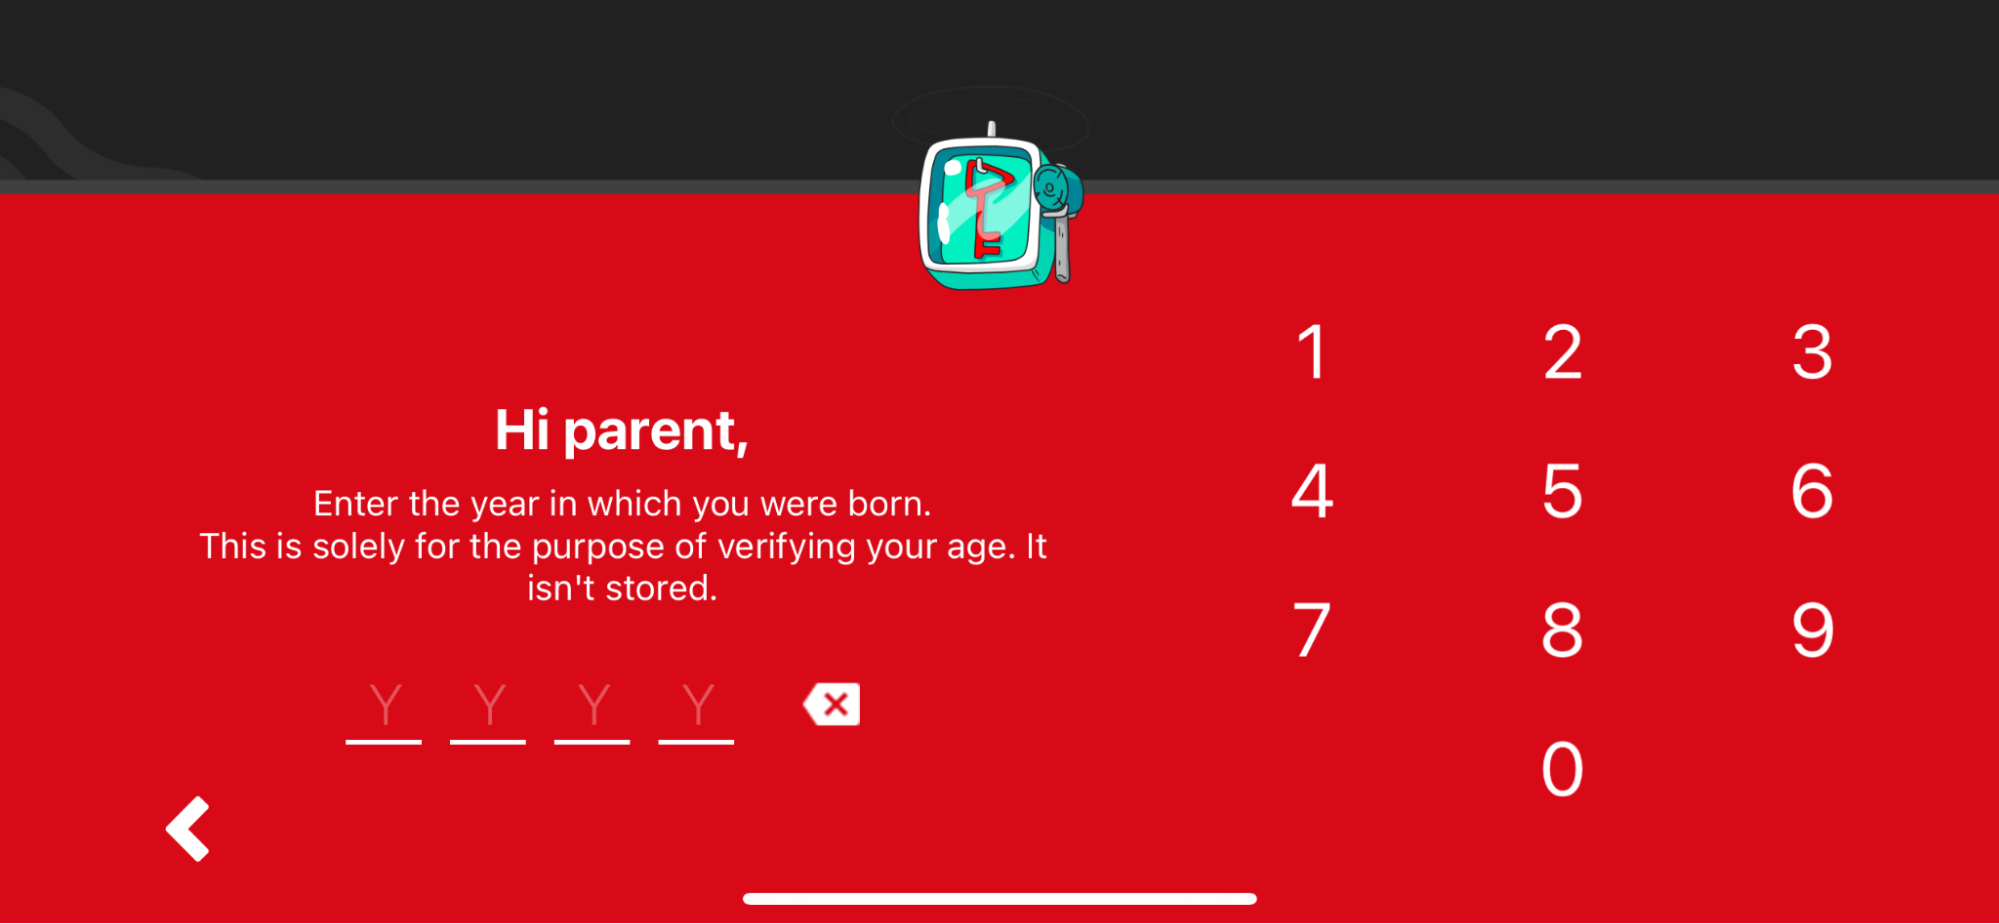 How to put parental controls on YouTube 32